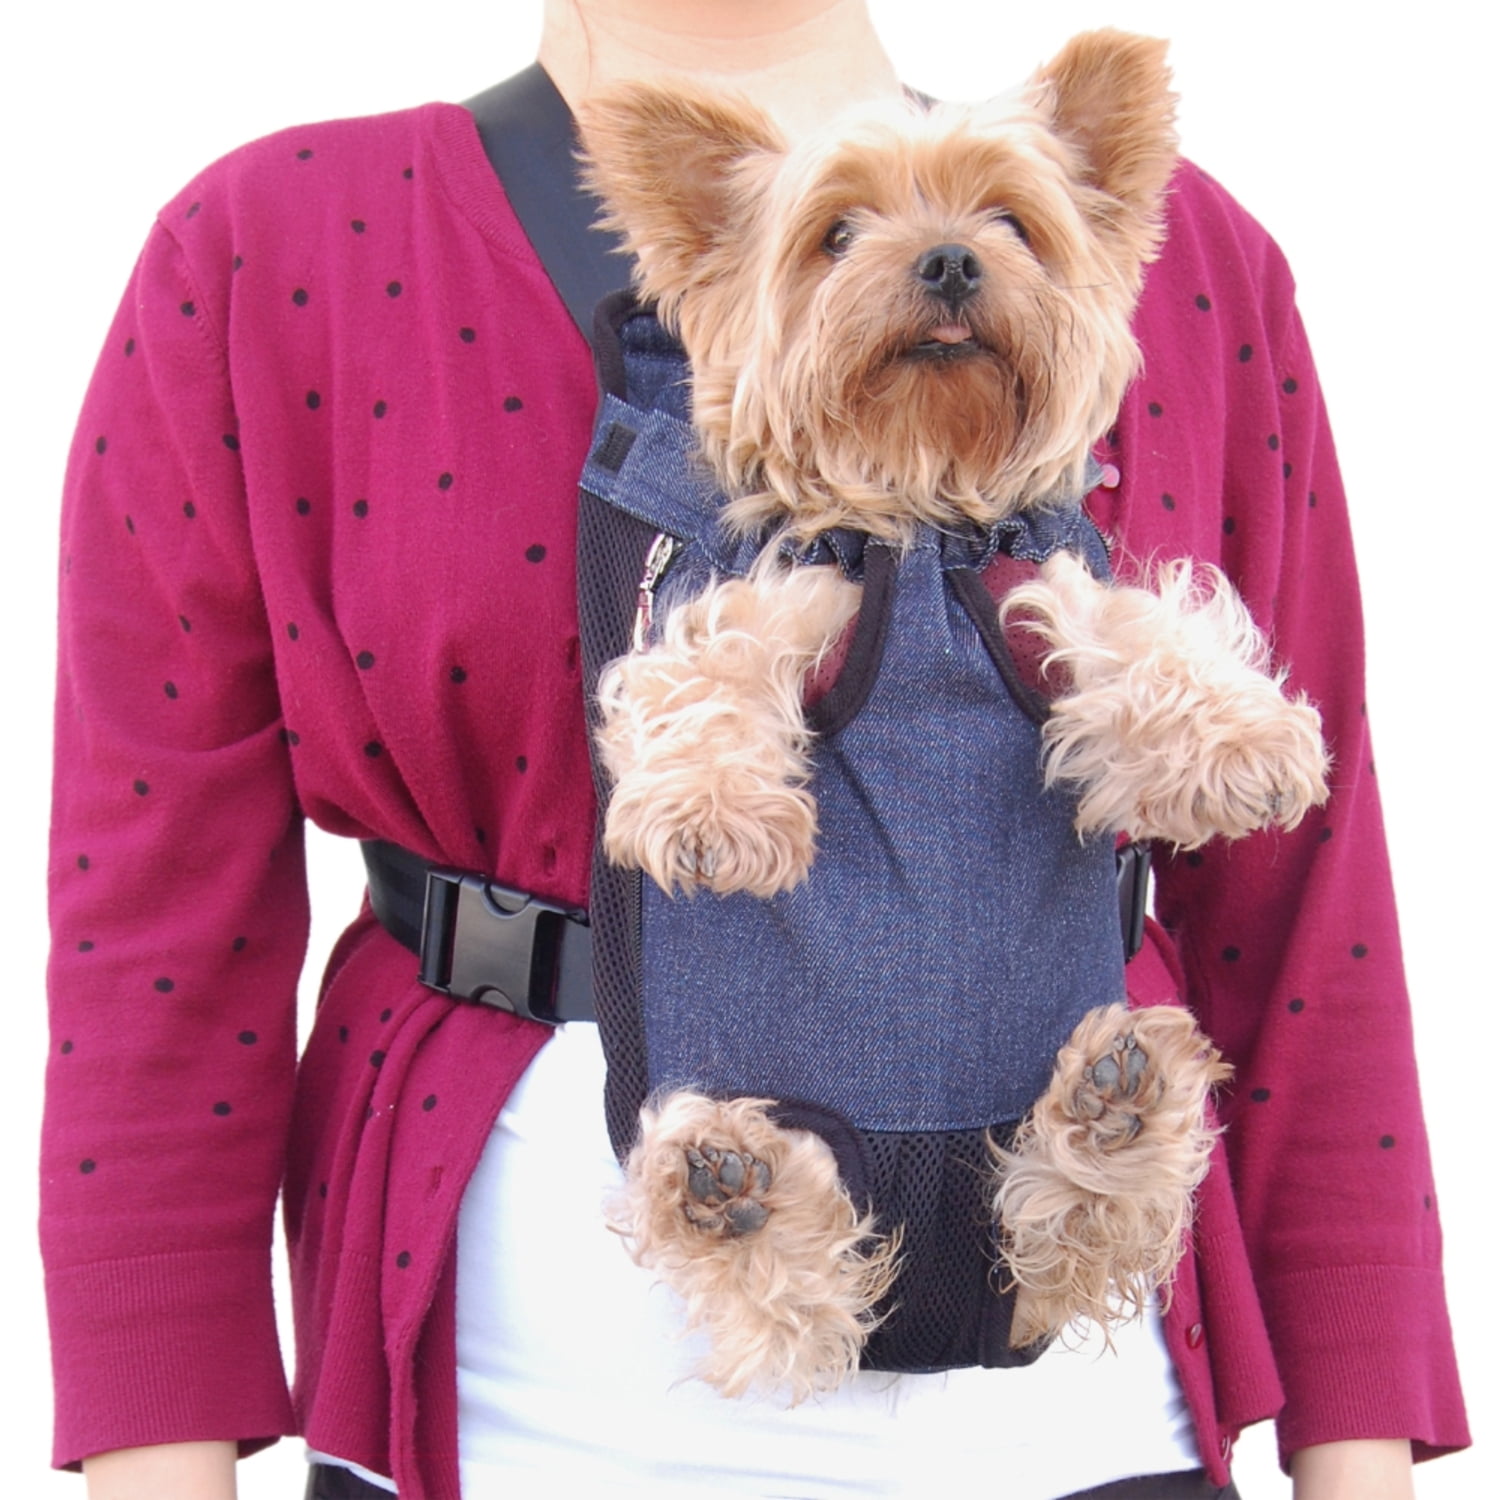 Dog Bag Cat Carrier For Small Pet Puppy 